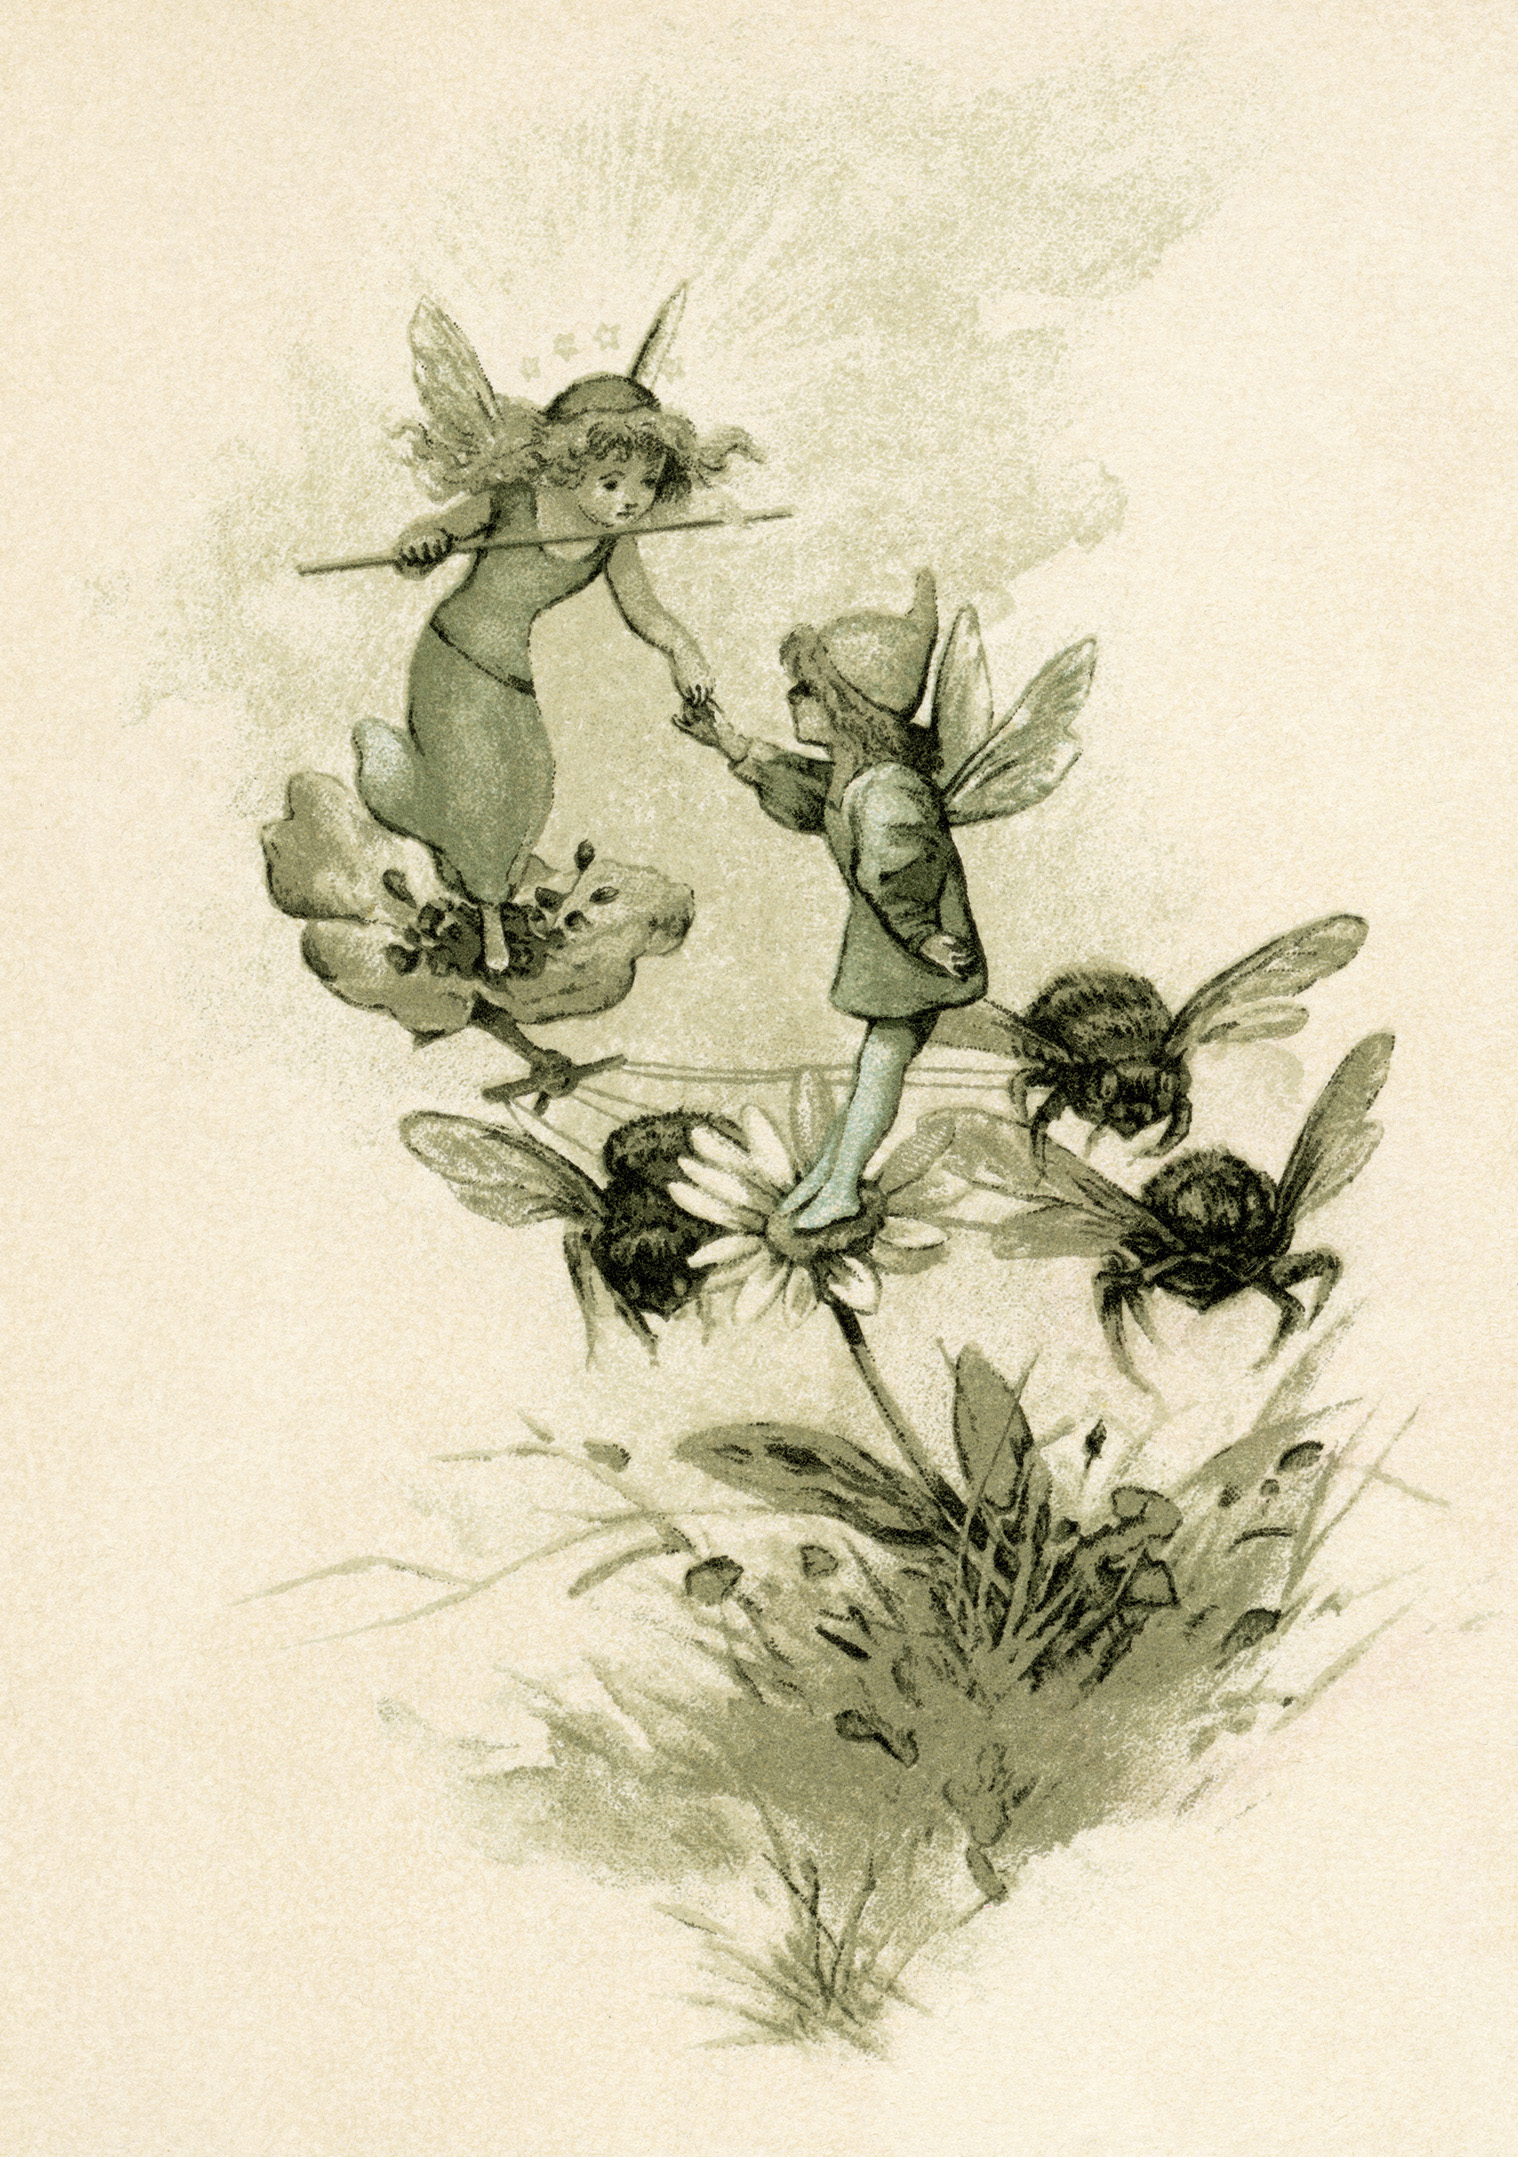 fairy clip art, free children’s printable, storybook illustration, vintage fairies and bees image, round robin Hoyer Mack